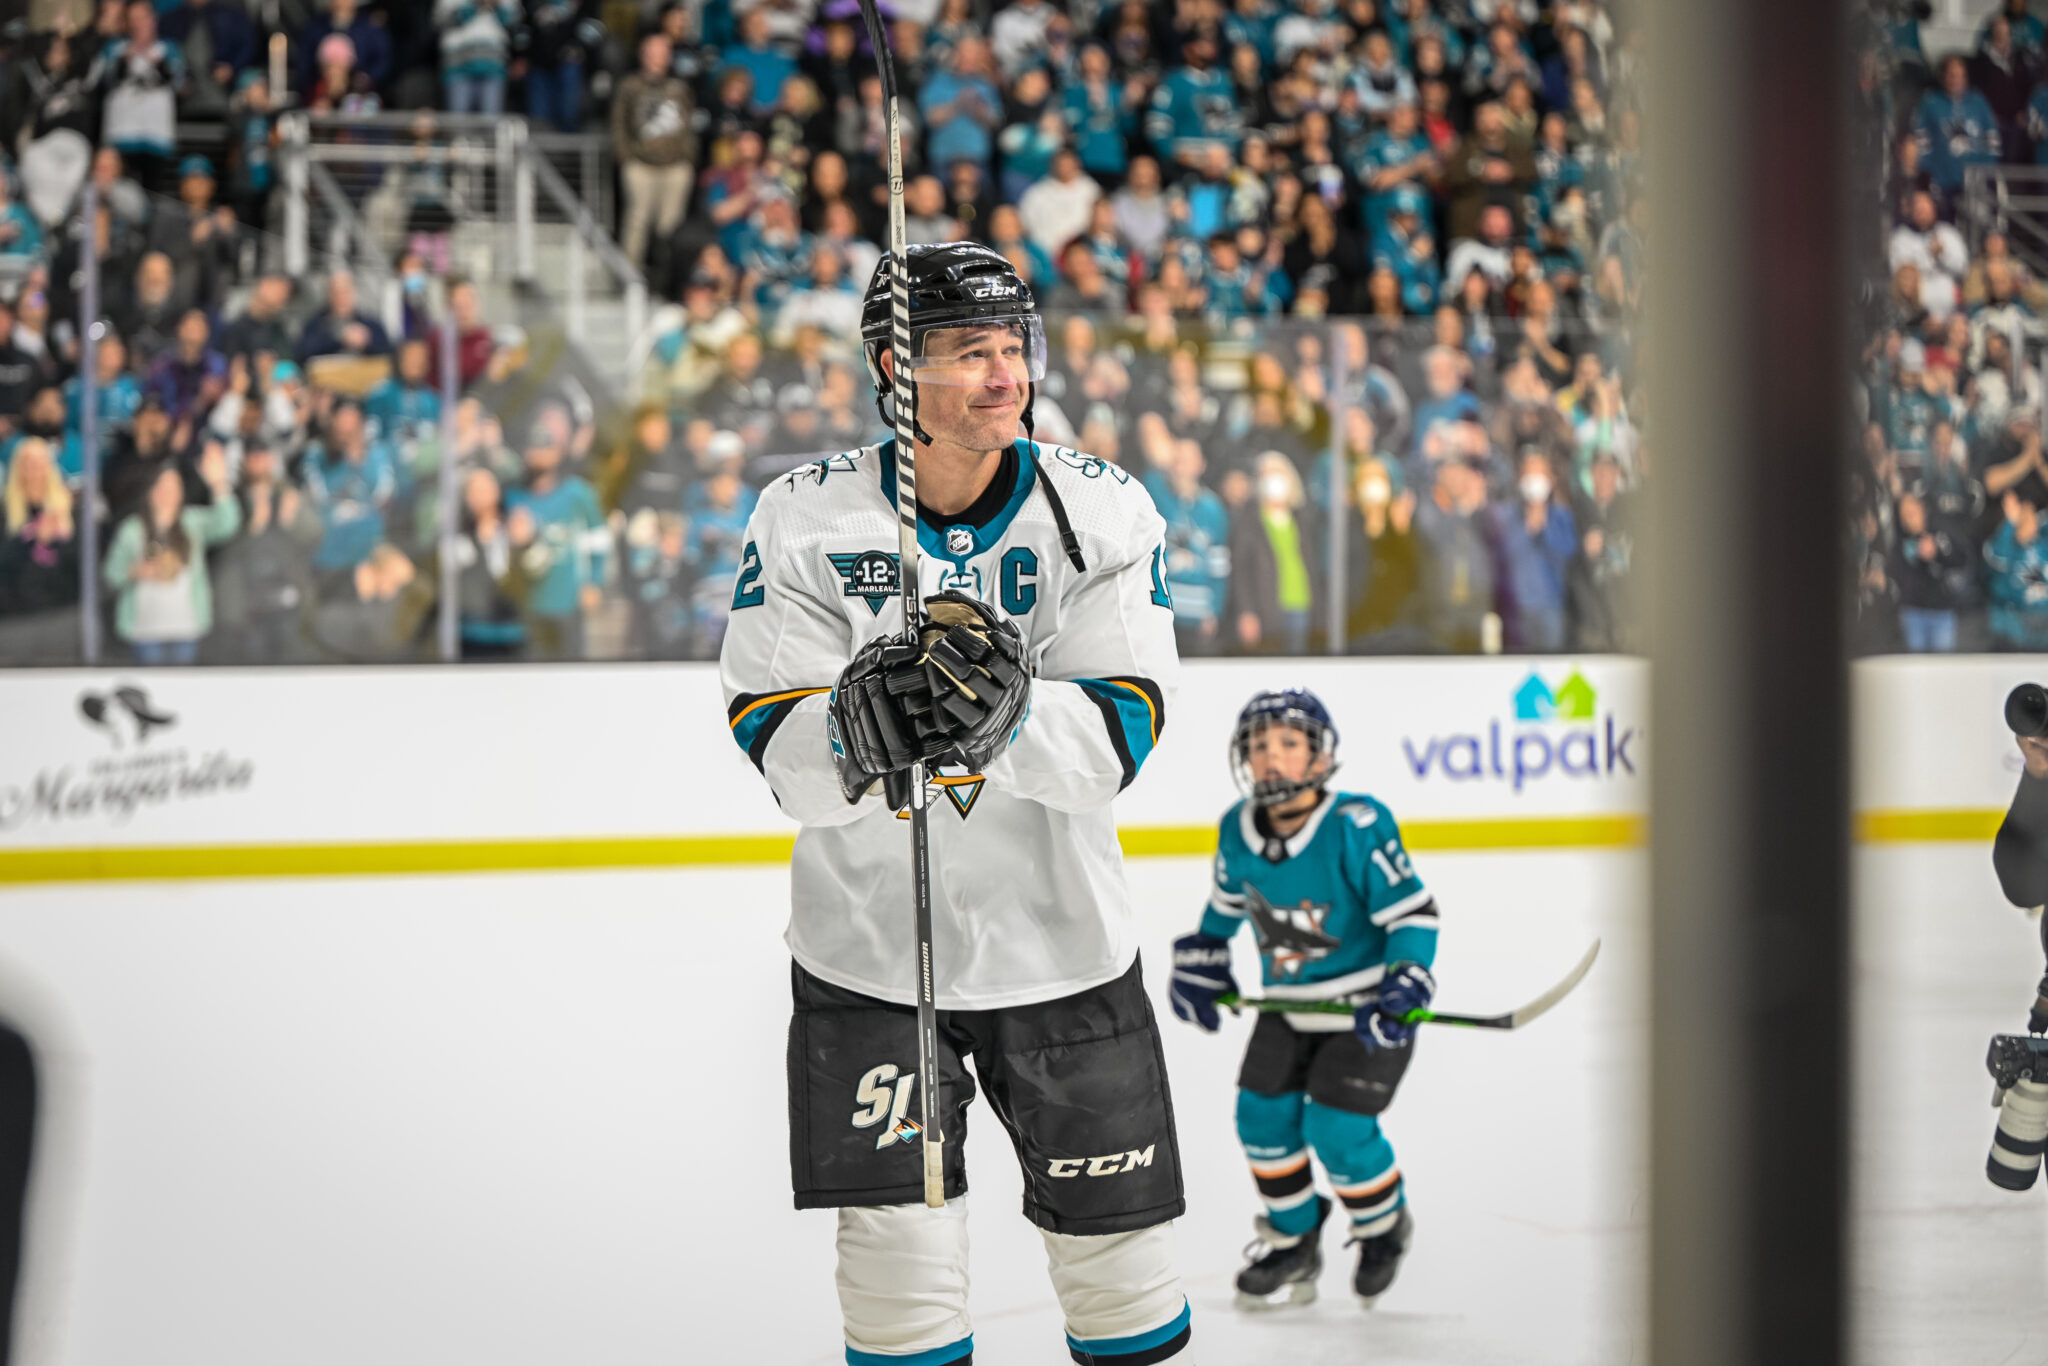 San Jose Sharks - A game between the Sharks Alumni and the